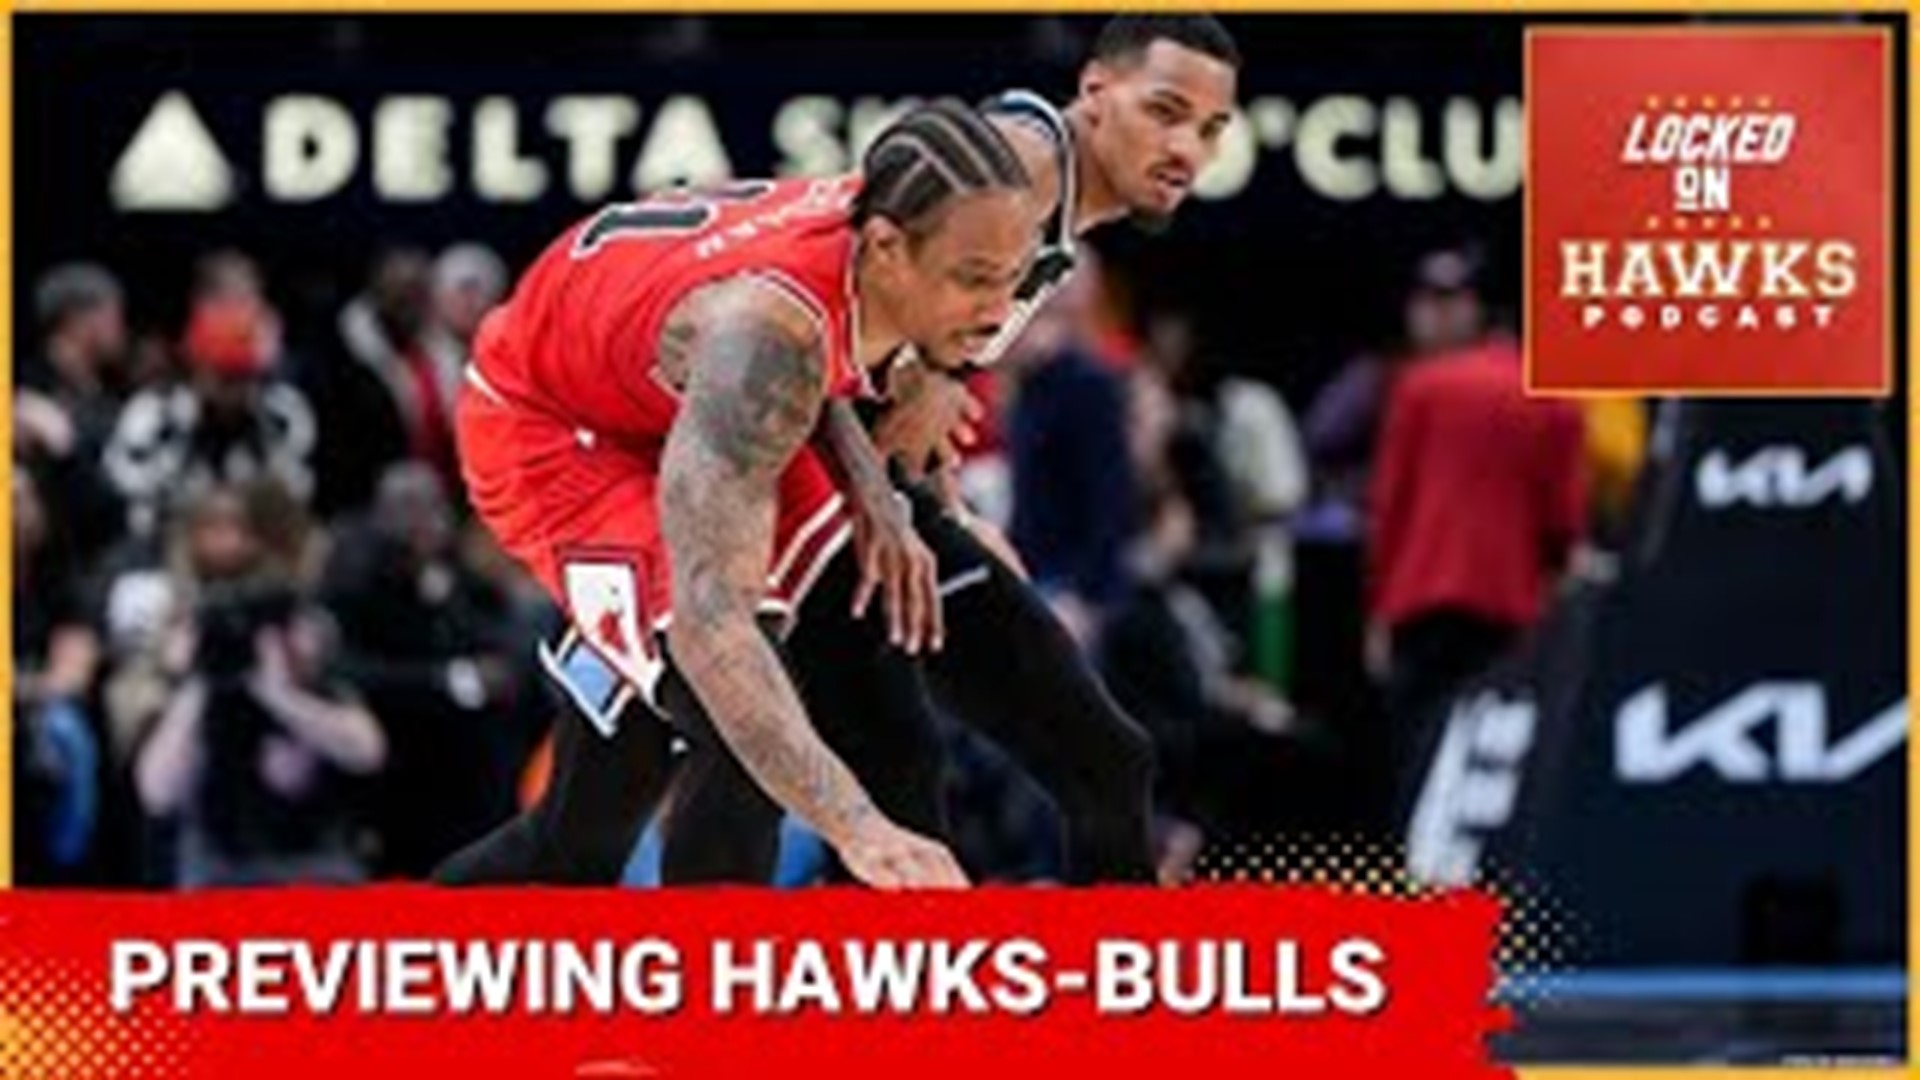 Brad Rowland  hosts episode No. 1695 of the Locked on Hawks podcast, and he is joined by Jason Patt of ClutchPoints and the Cash Considerations Podcast.